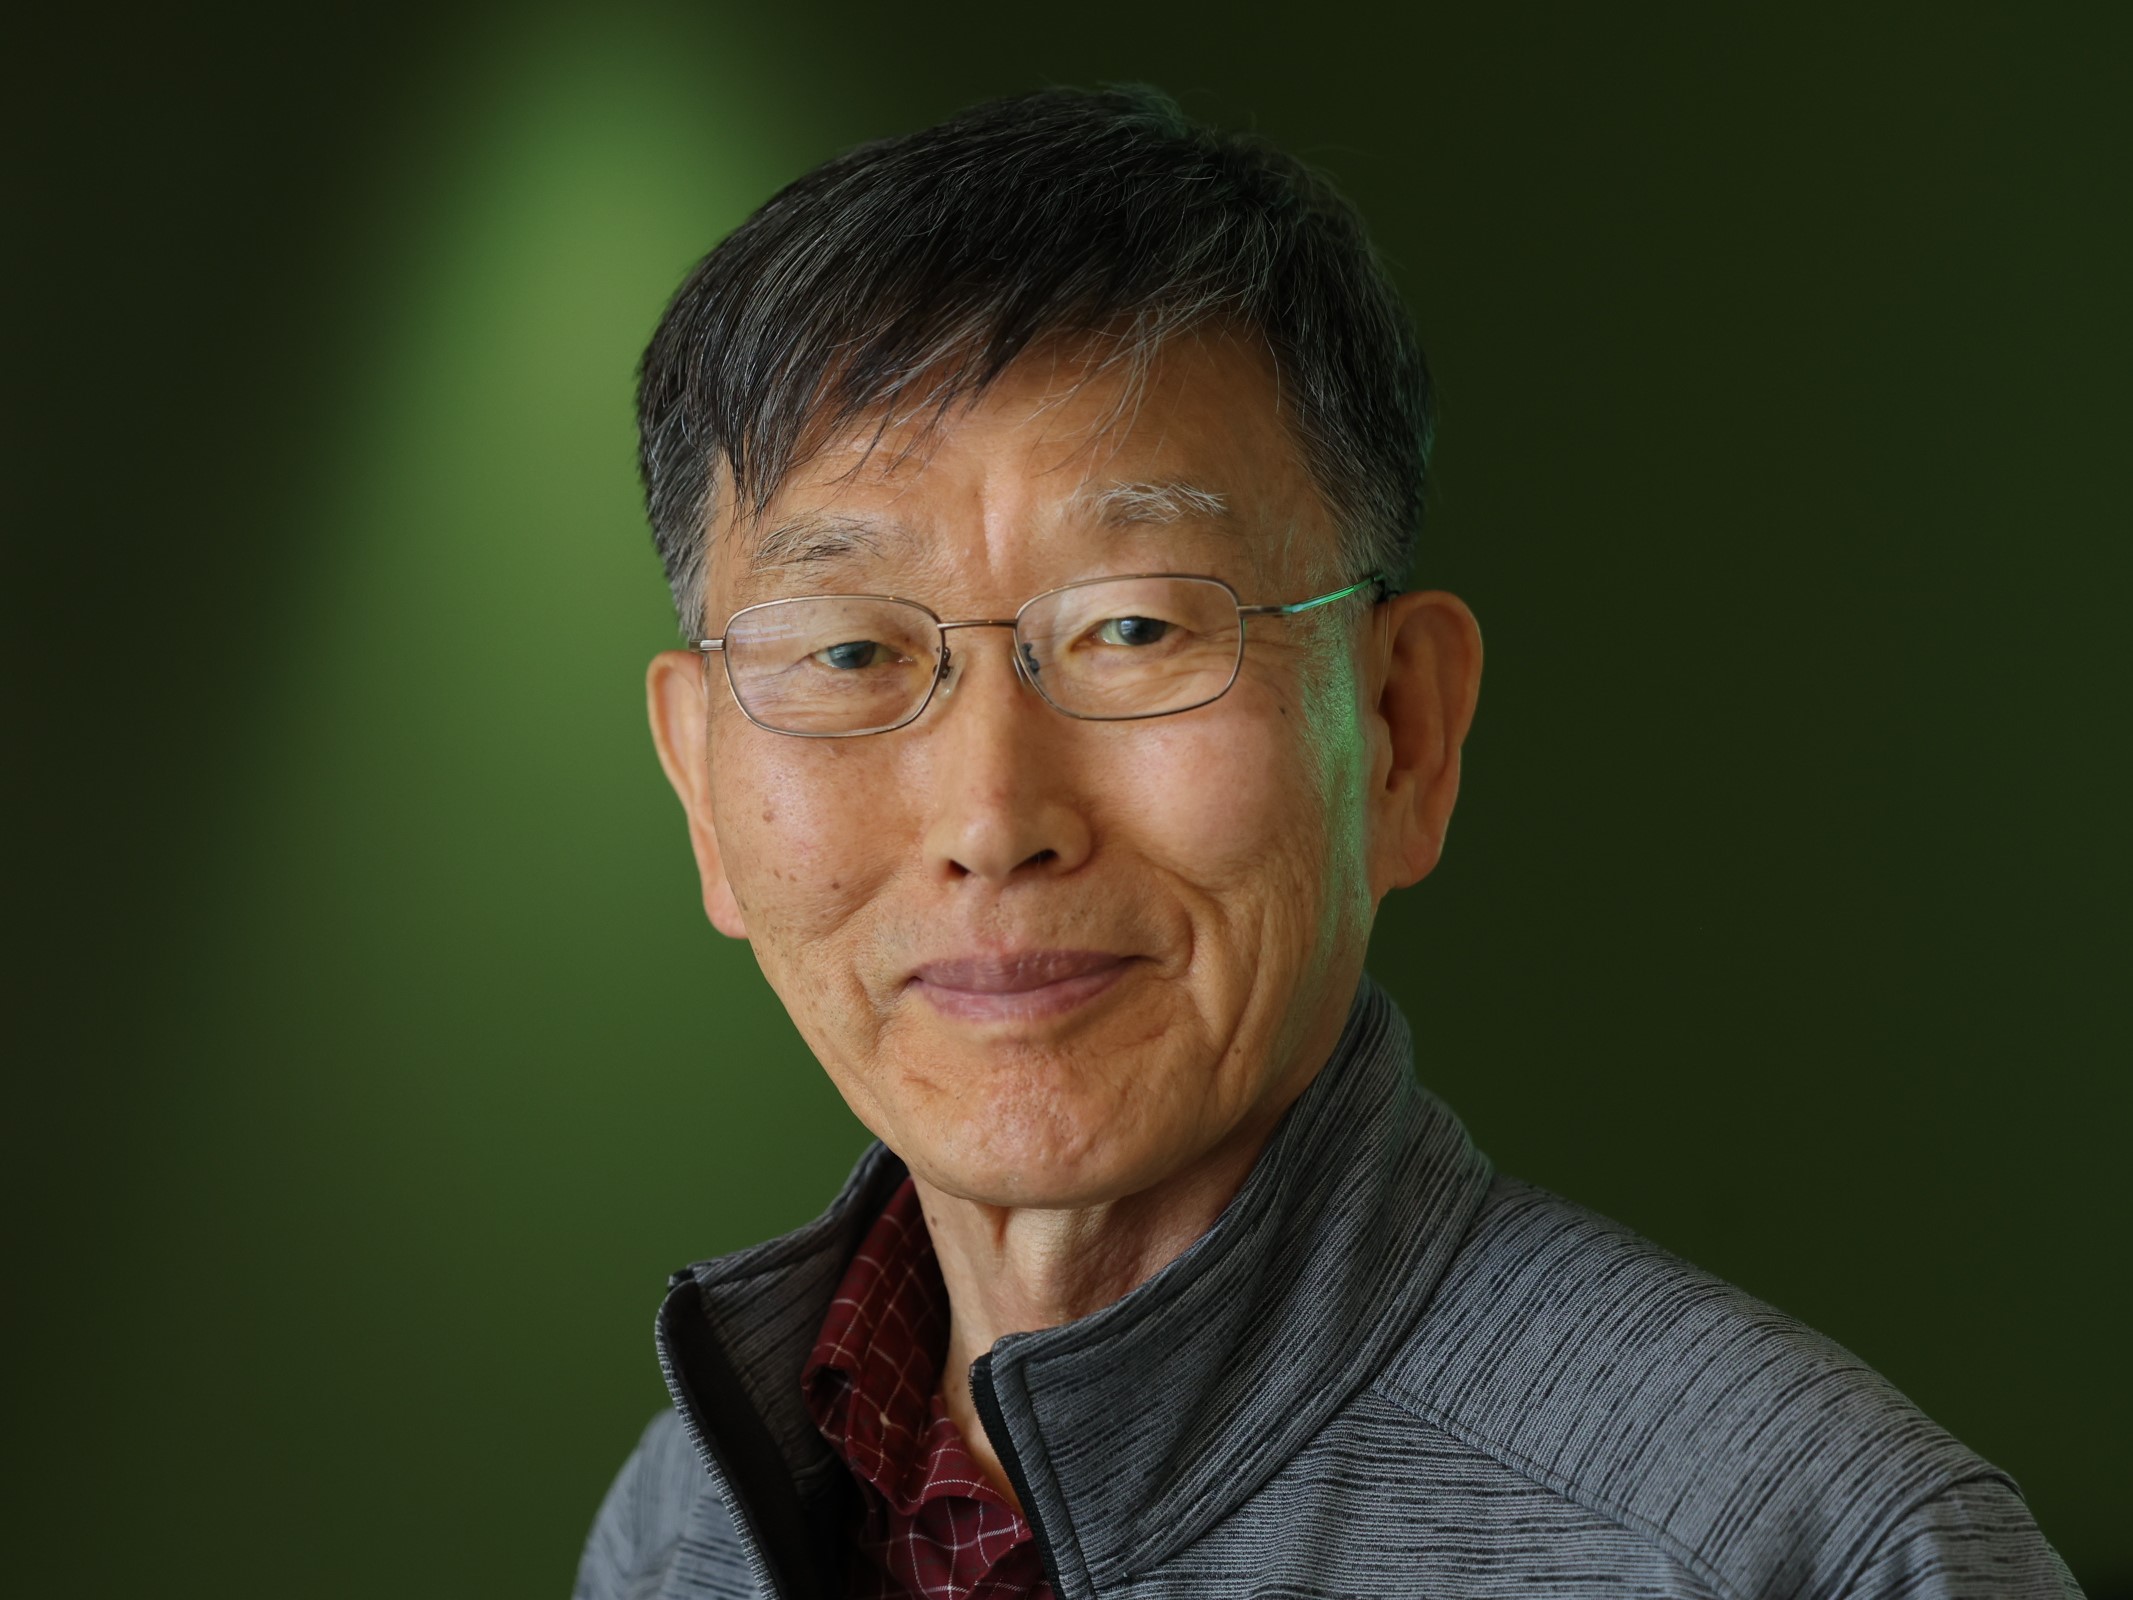 Kwang Lee, Ph.D., chair and professor of electrical and computer engineering at Baylor University’s School of Engineering and Computer Science